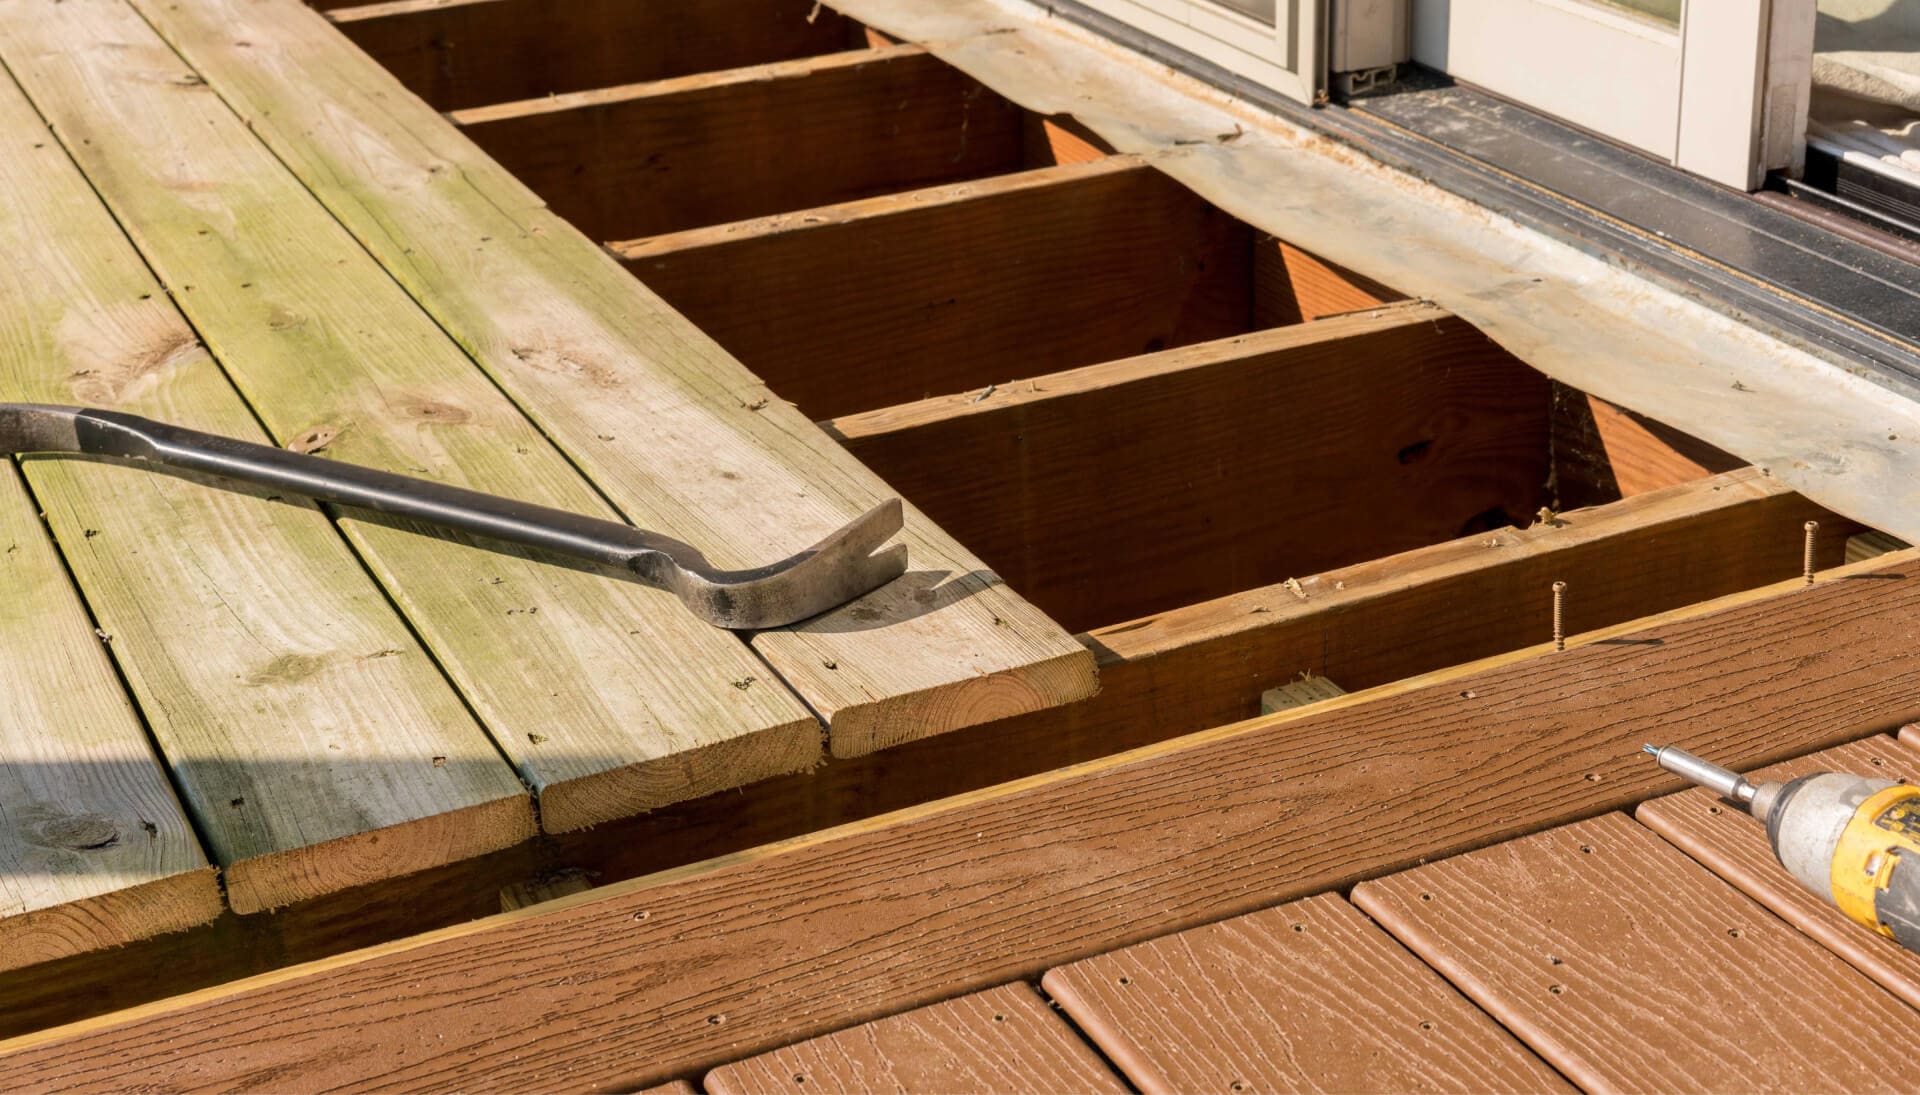 We offer the best deck repair services in Houston, TX